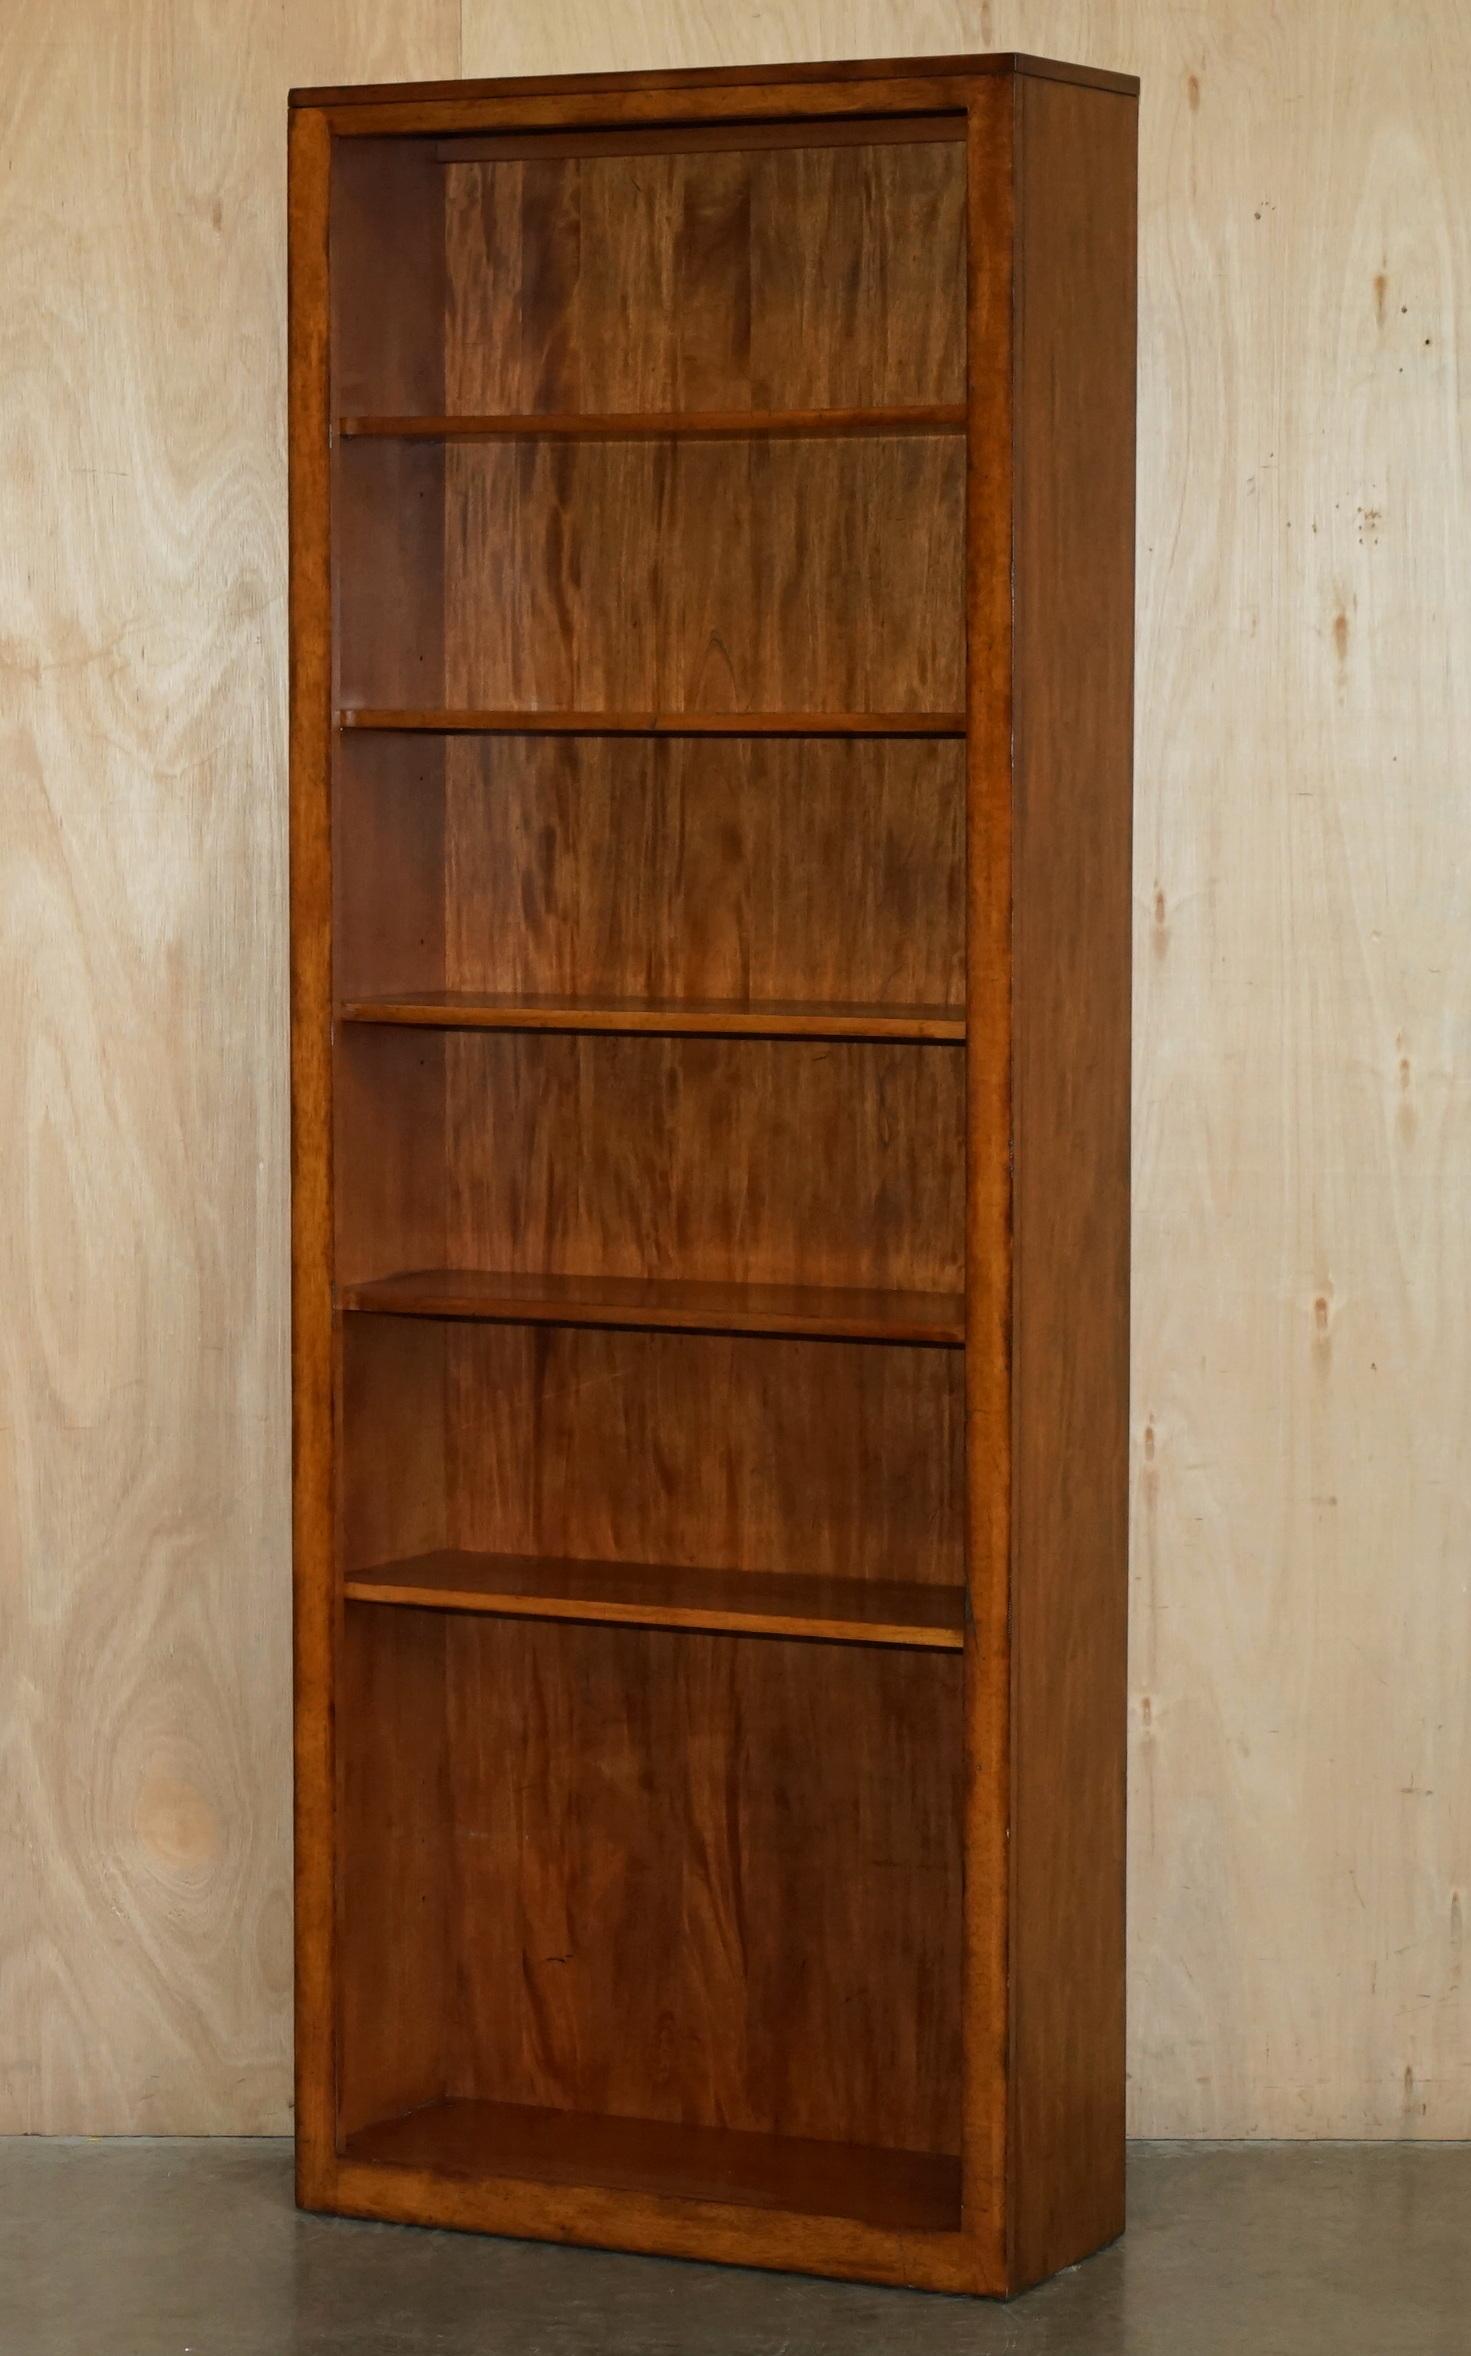 PAIR OF HARDWOOD FINISH TALL OPEN LIBRARY BOOKCASES BY THE DESiGNER ETHAN ALLEN 4